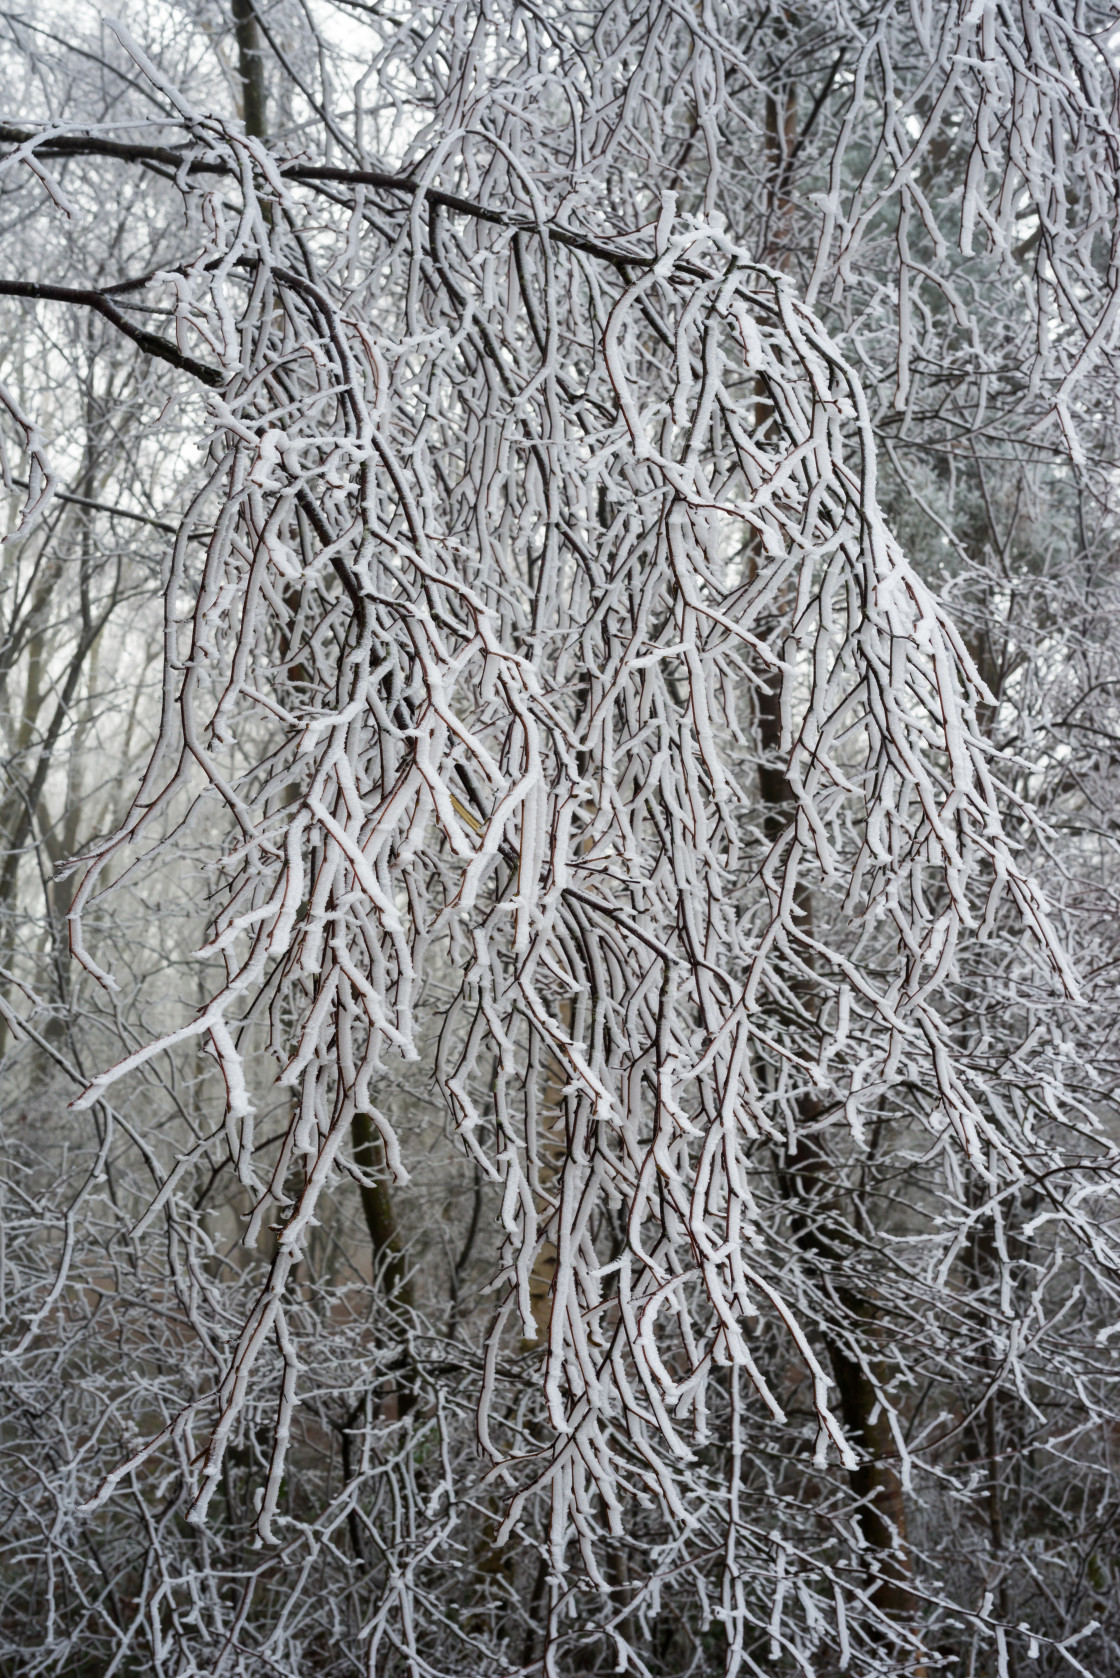 "Frosty Branch" stock image